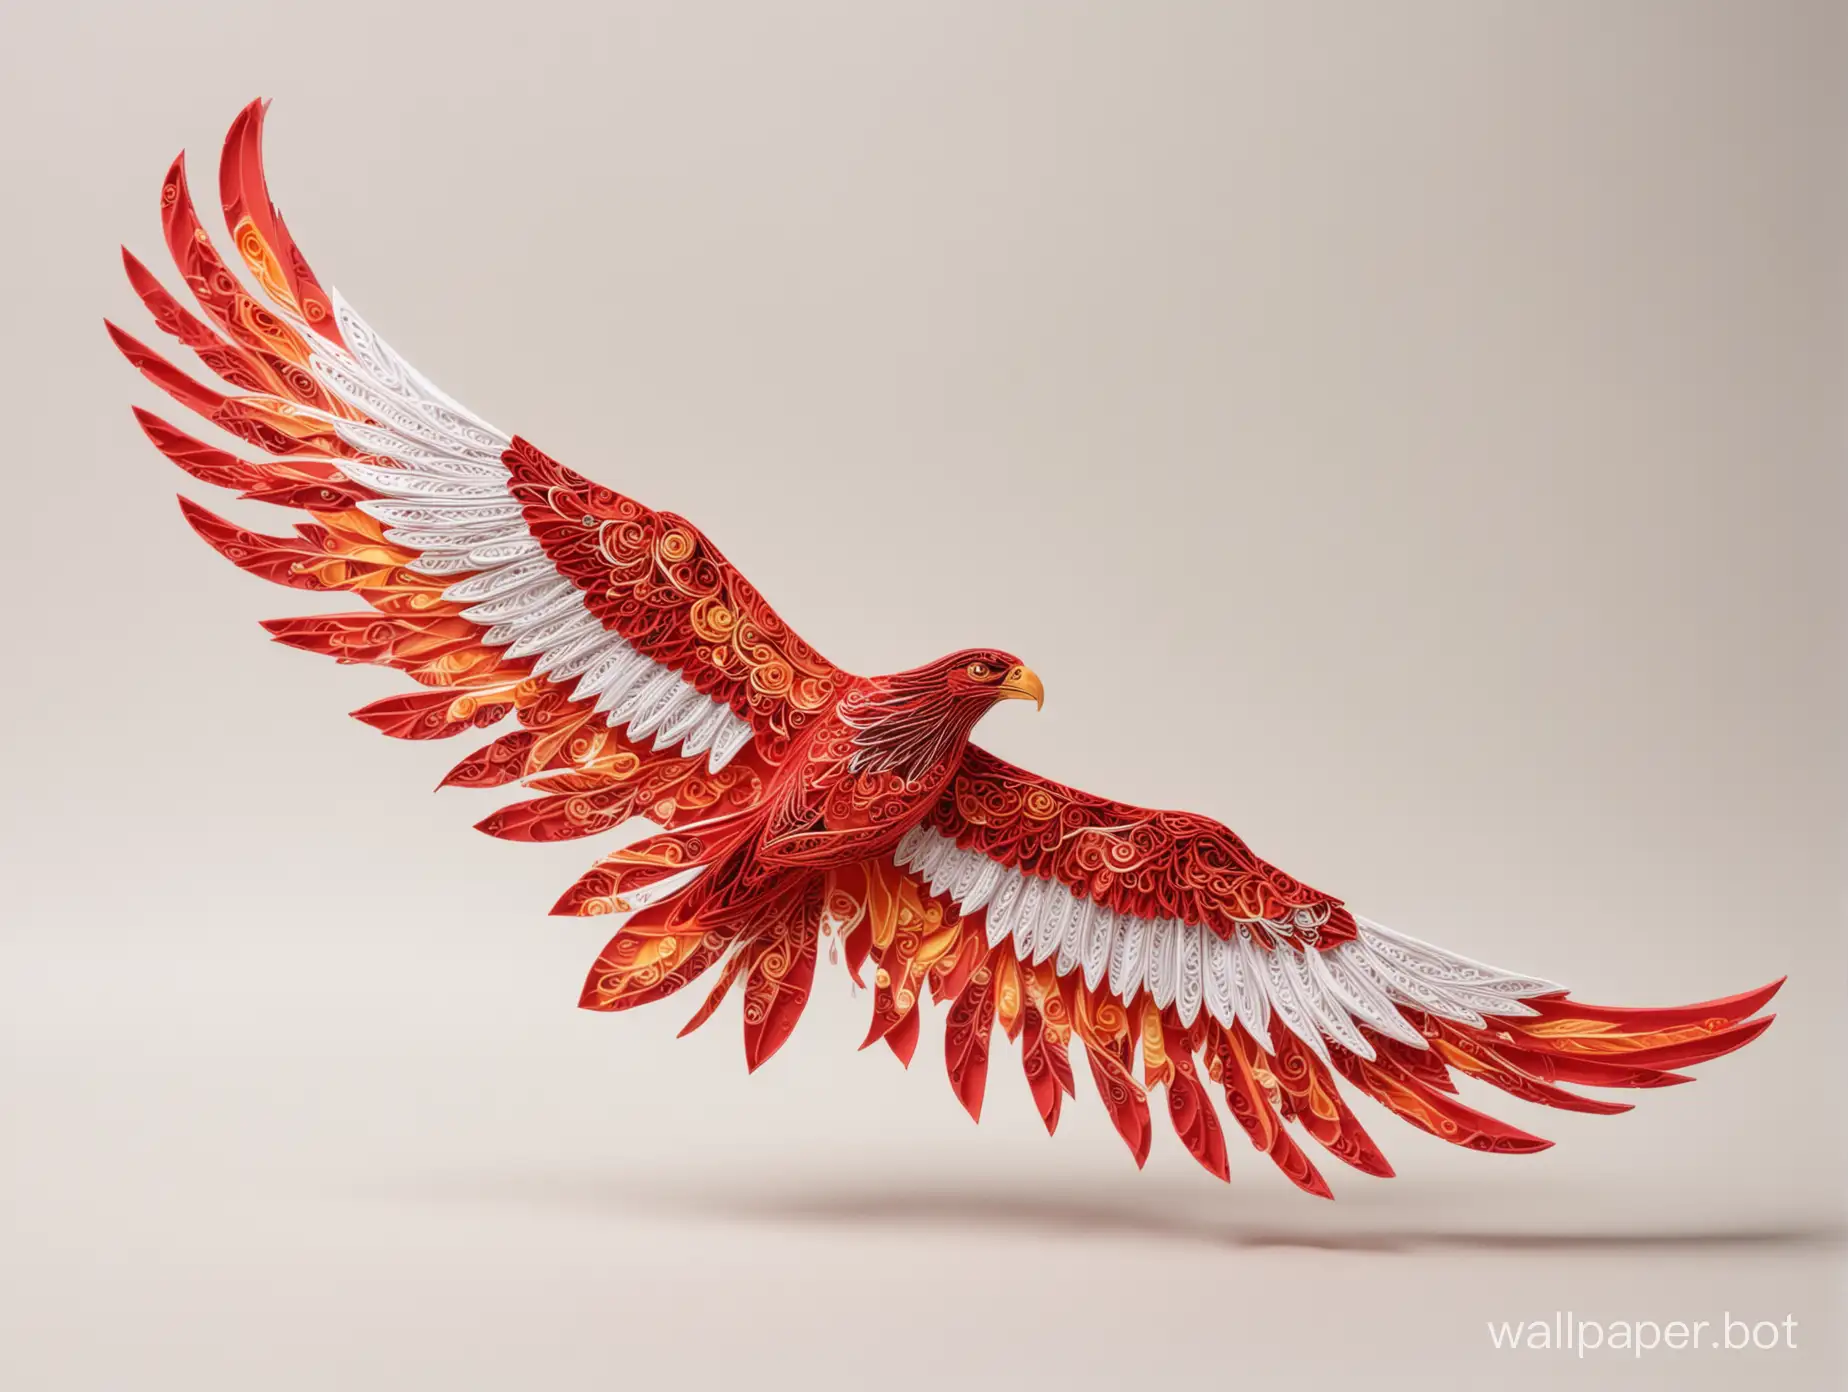 front-angle view of a red eagle with red decorative flames in a papercraft quilling style. Simple composition with a white background.